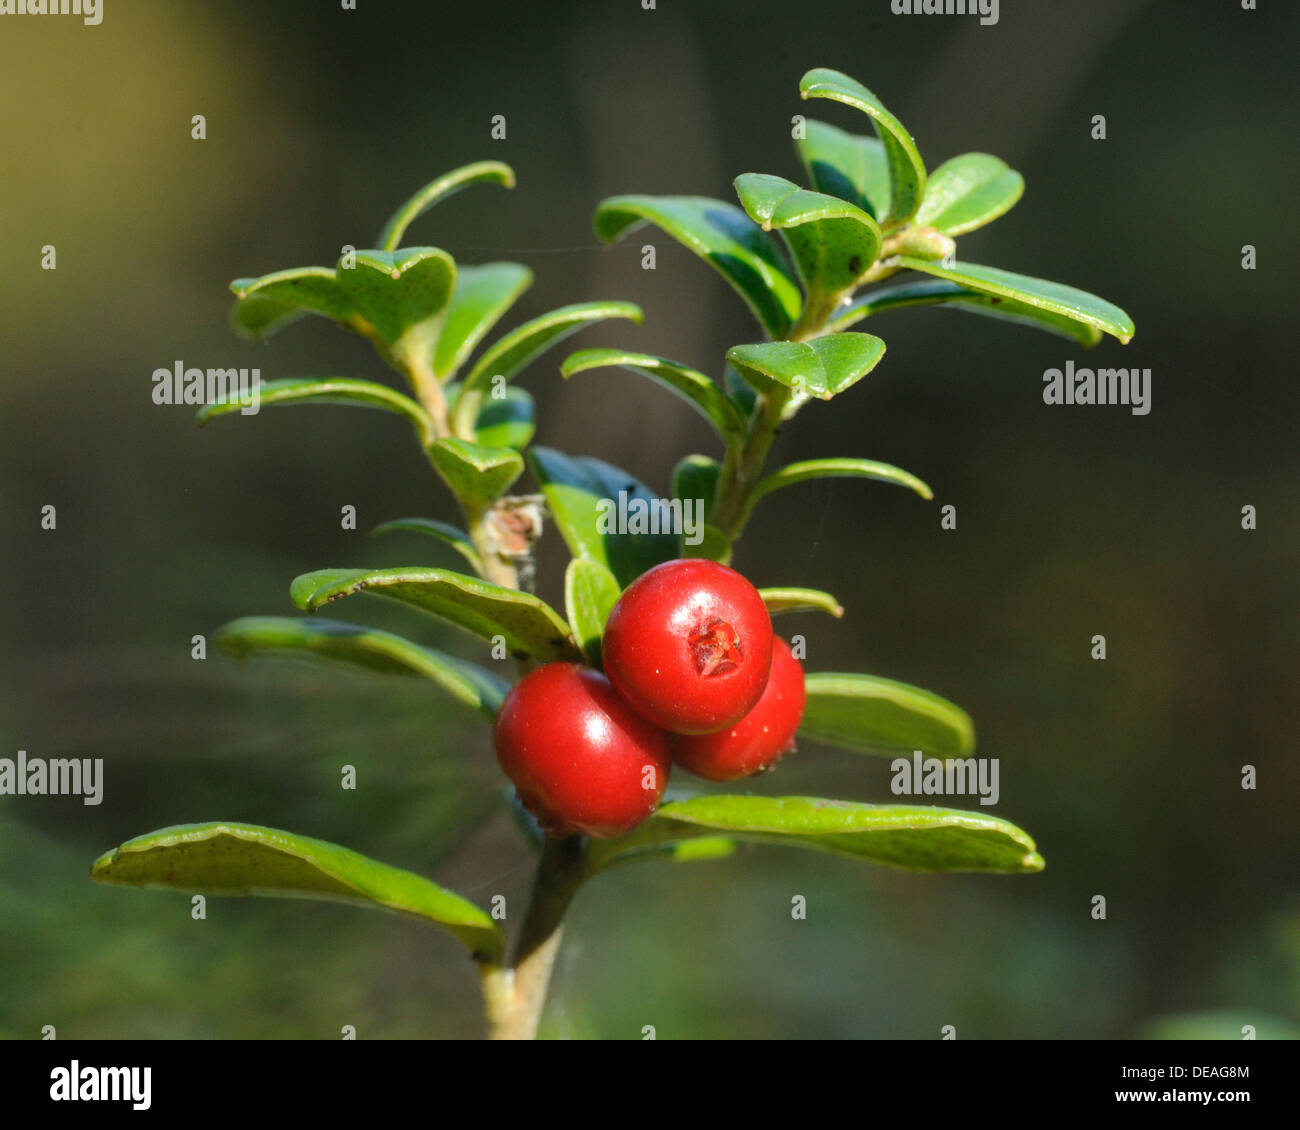 Foxberry - low evergreen shrub of high north temperate regions of Europe and Asia and America bearing red edible berries. Stock Photo